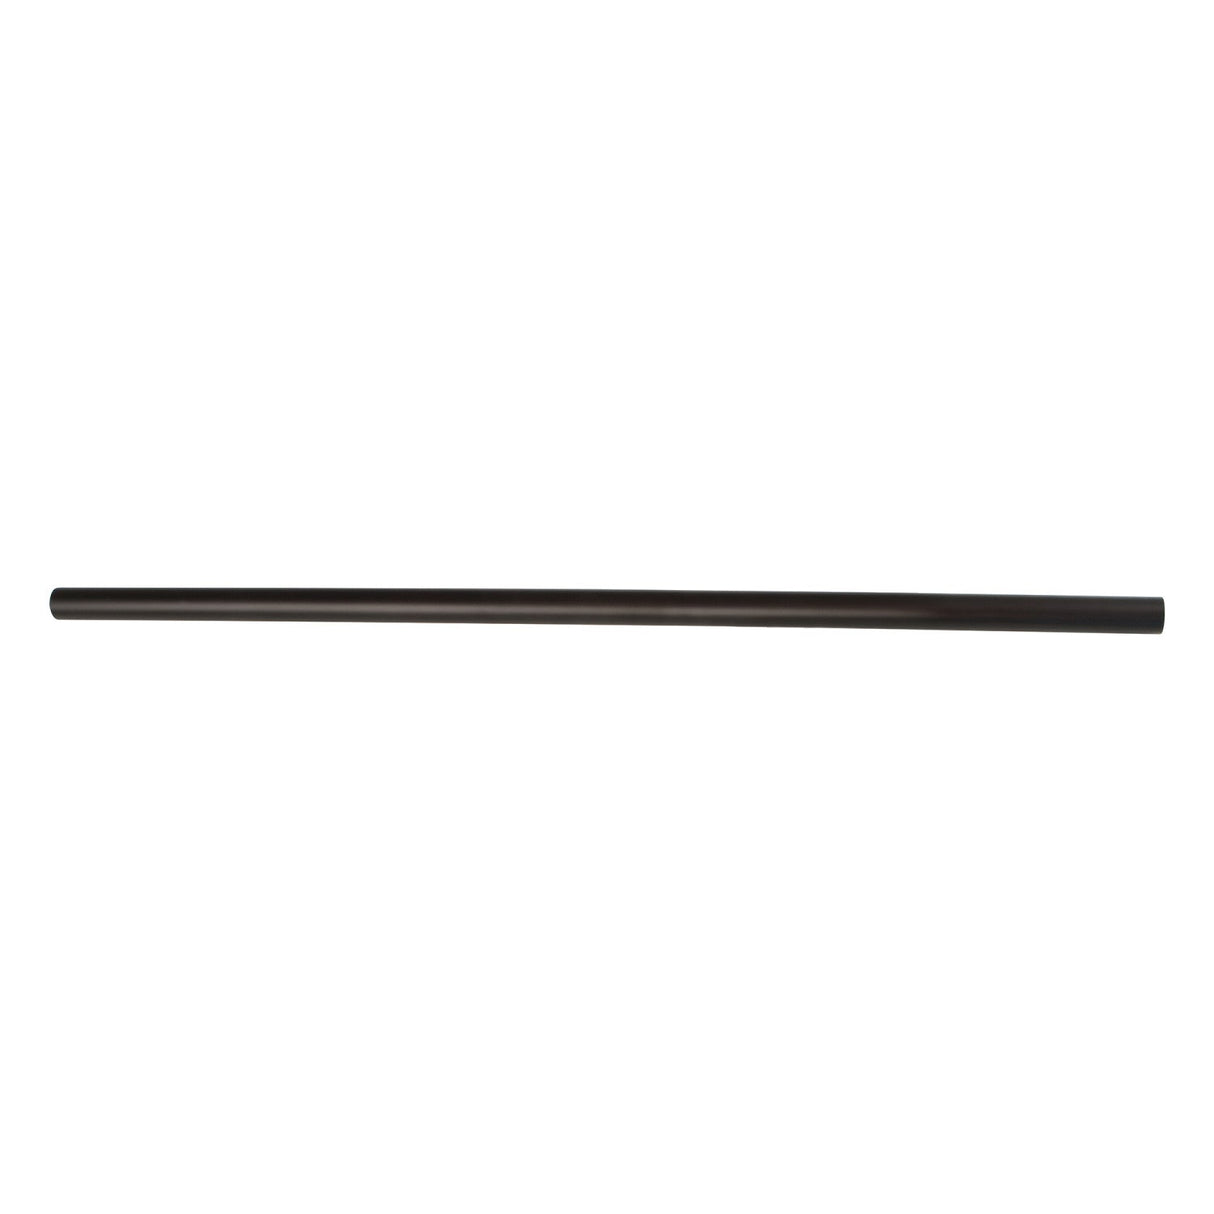 BAR1161BK 24-Inch X 3/4 Inch O.D Towel Bar Only, Black Stainless Steel